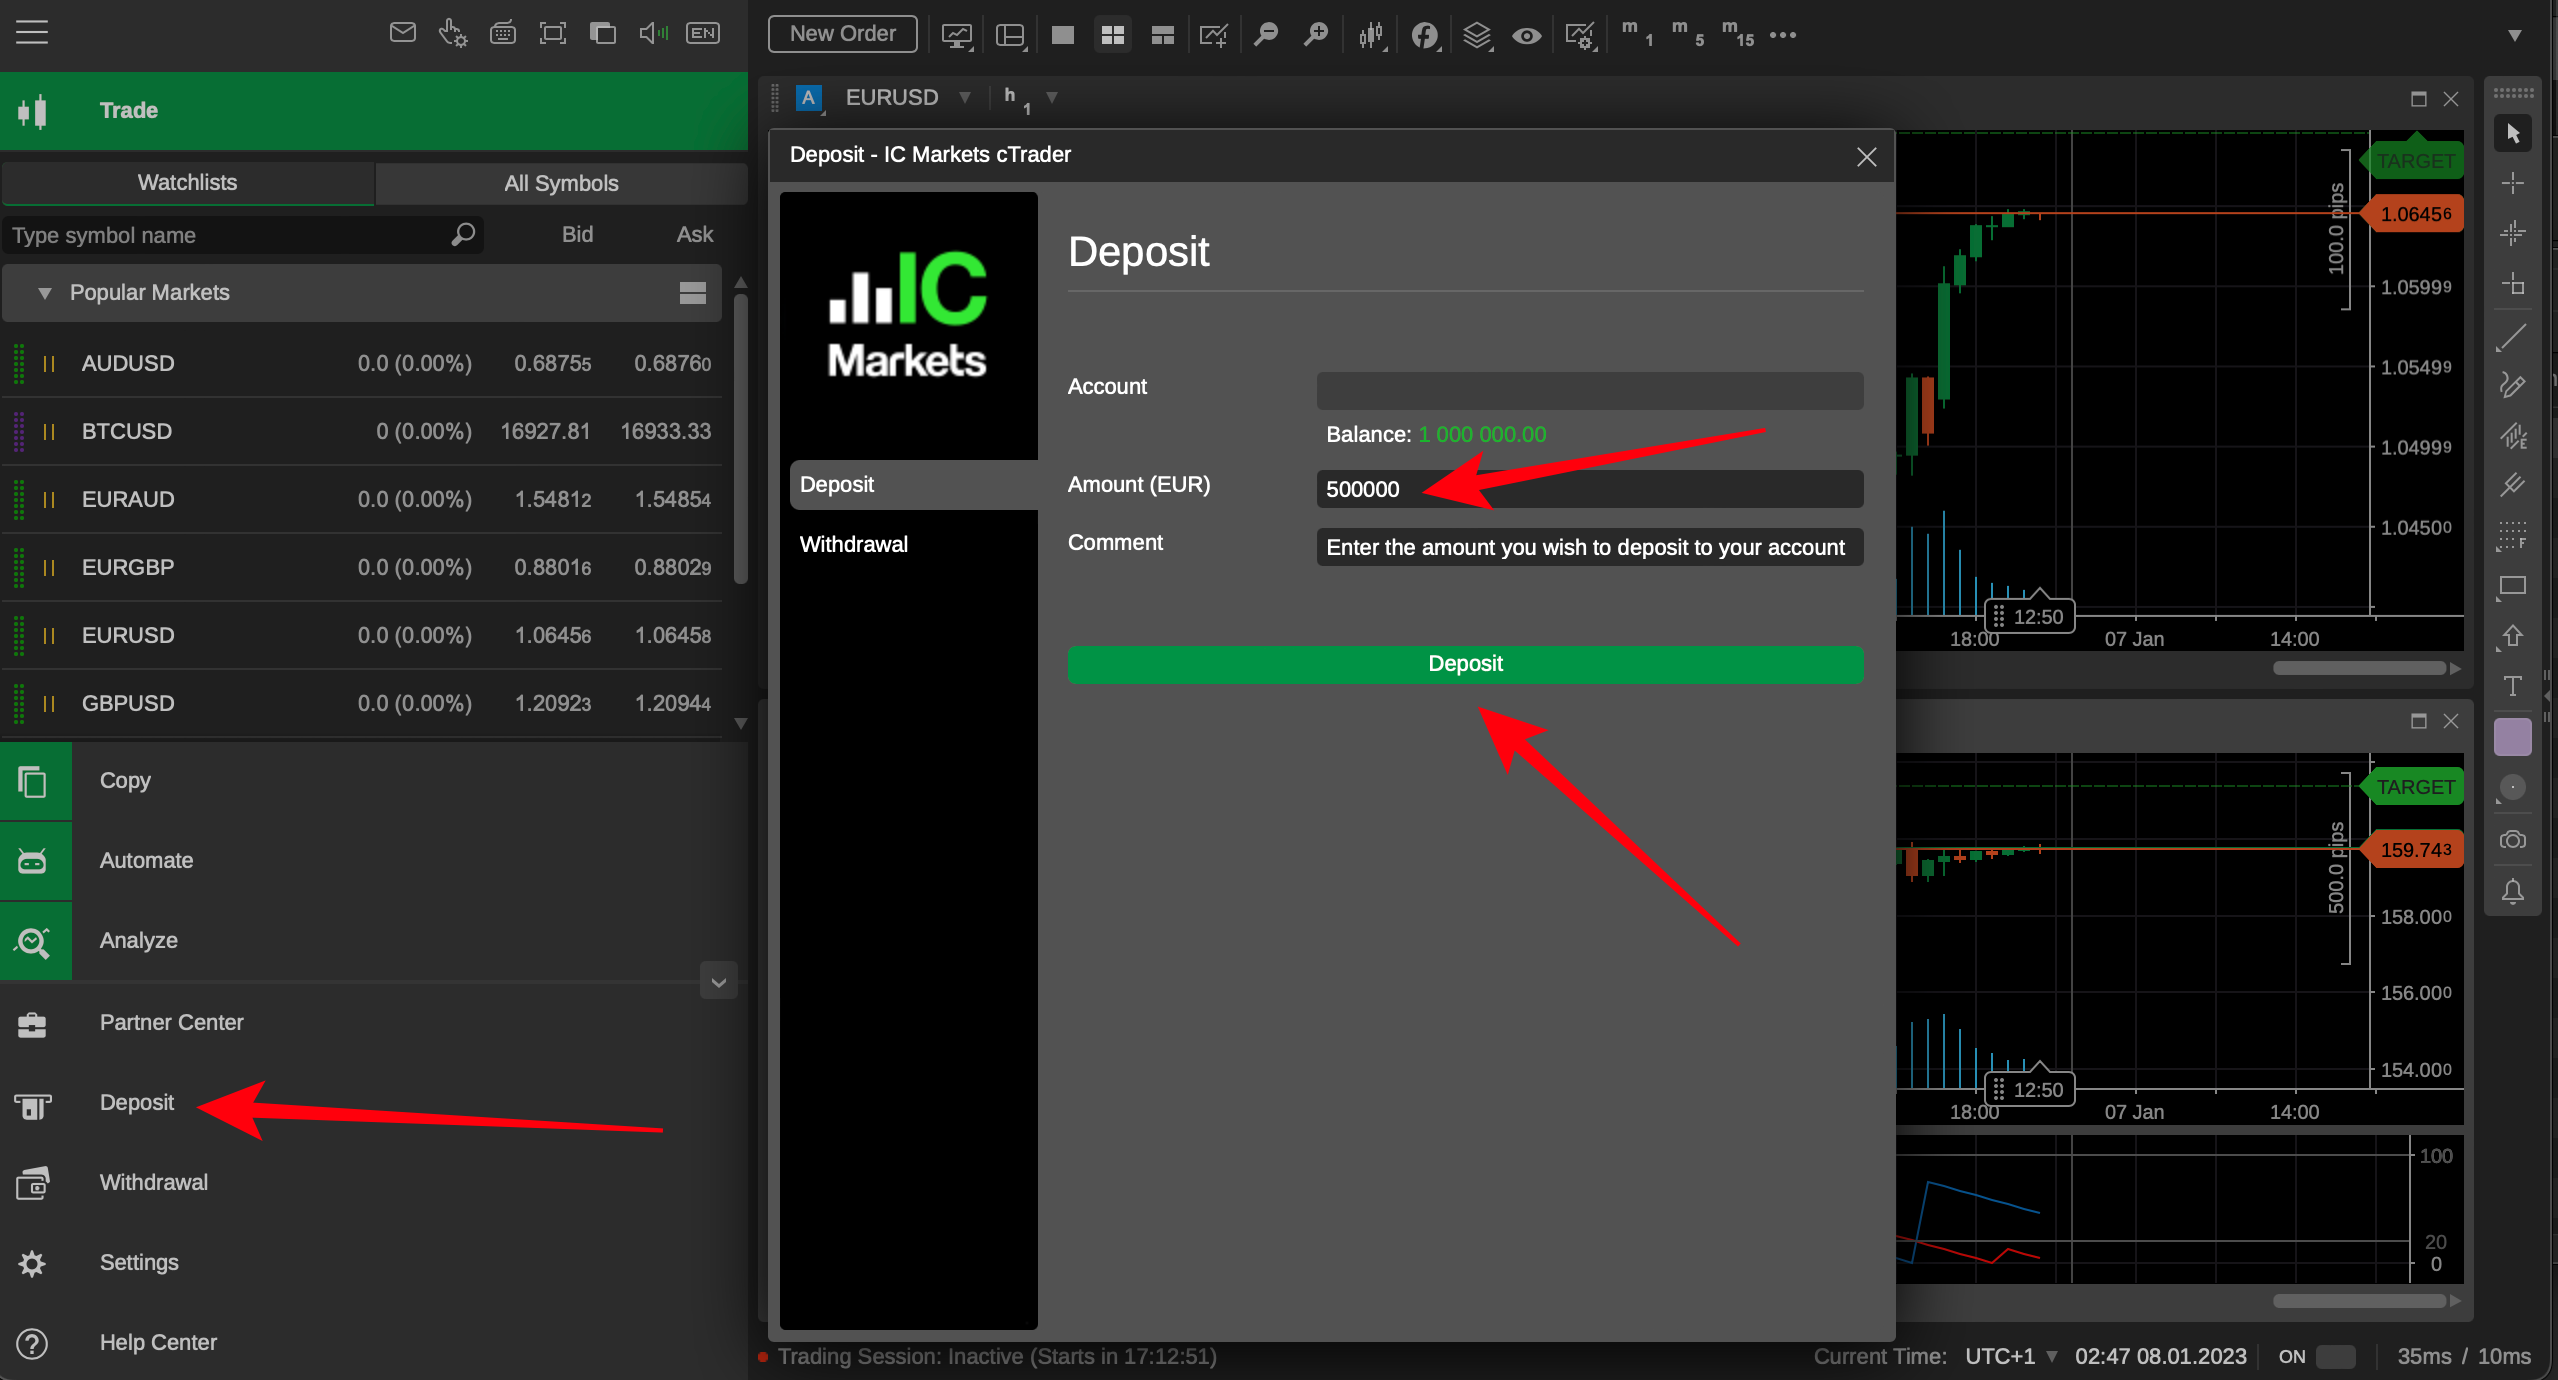 How to add money to the cTrader demo account